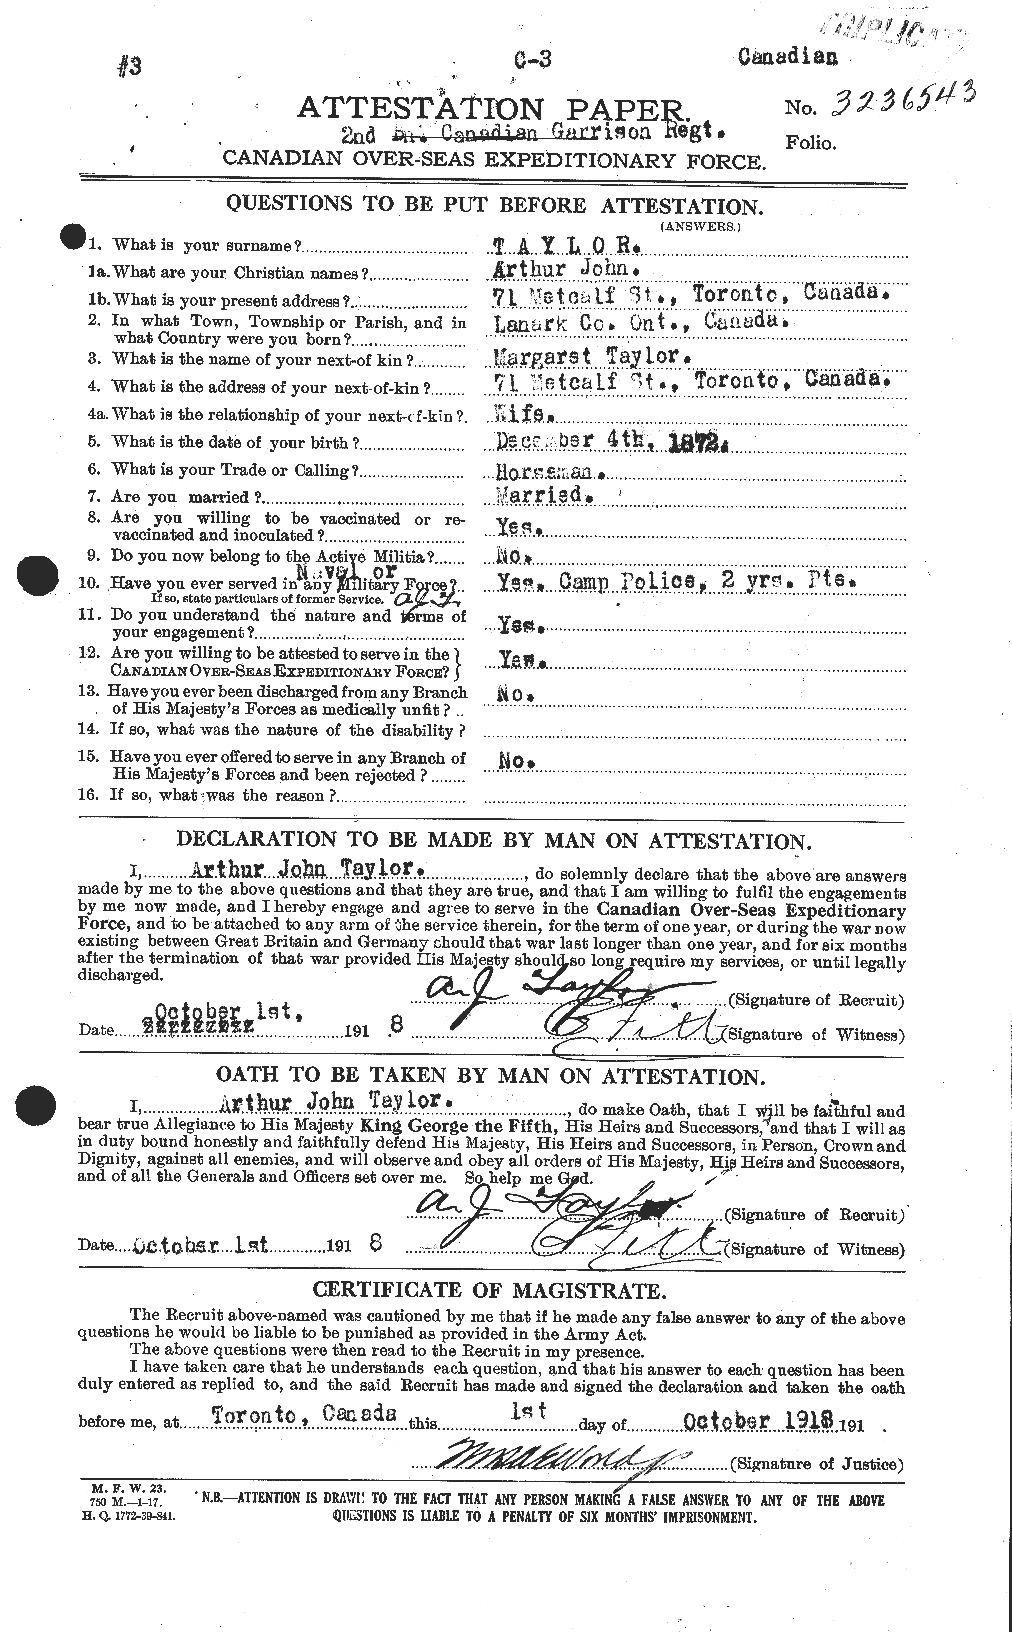 Personnel Records of the First World War - CEF 626734a